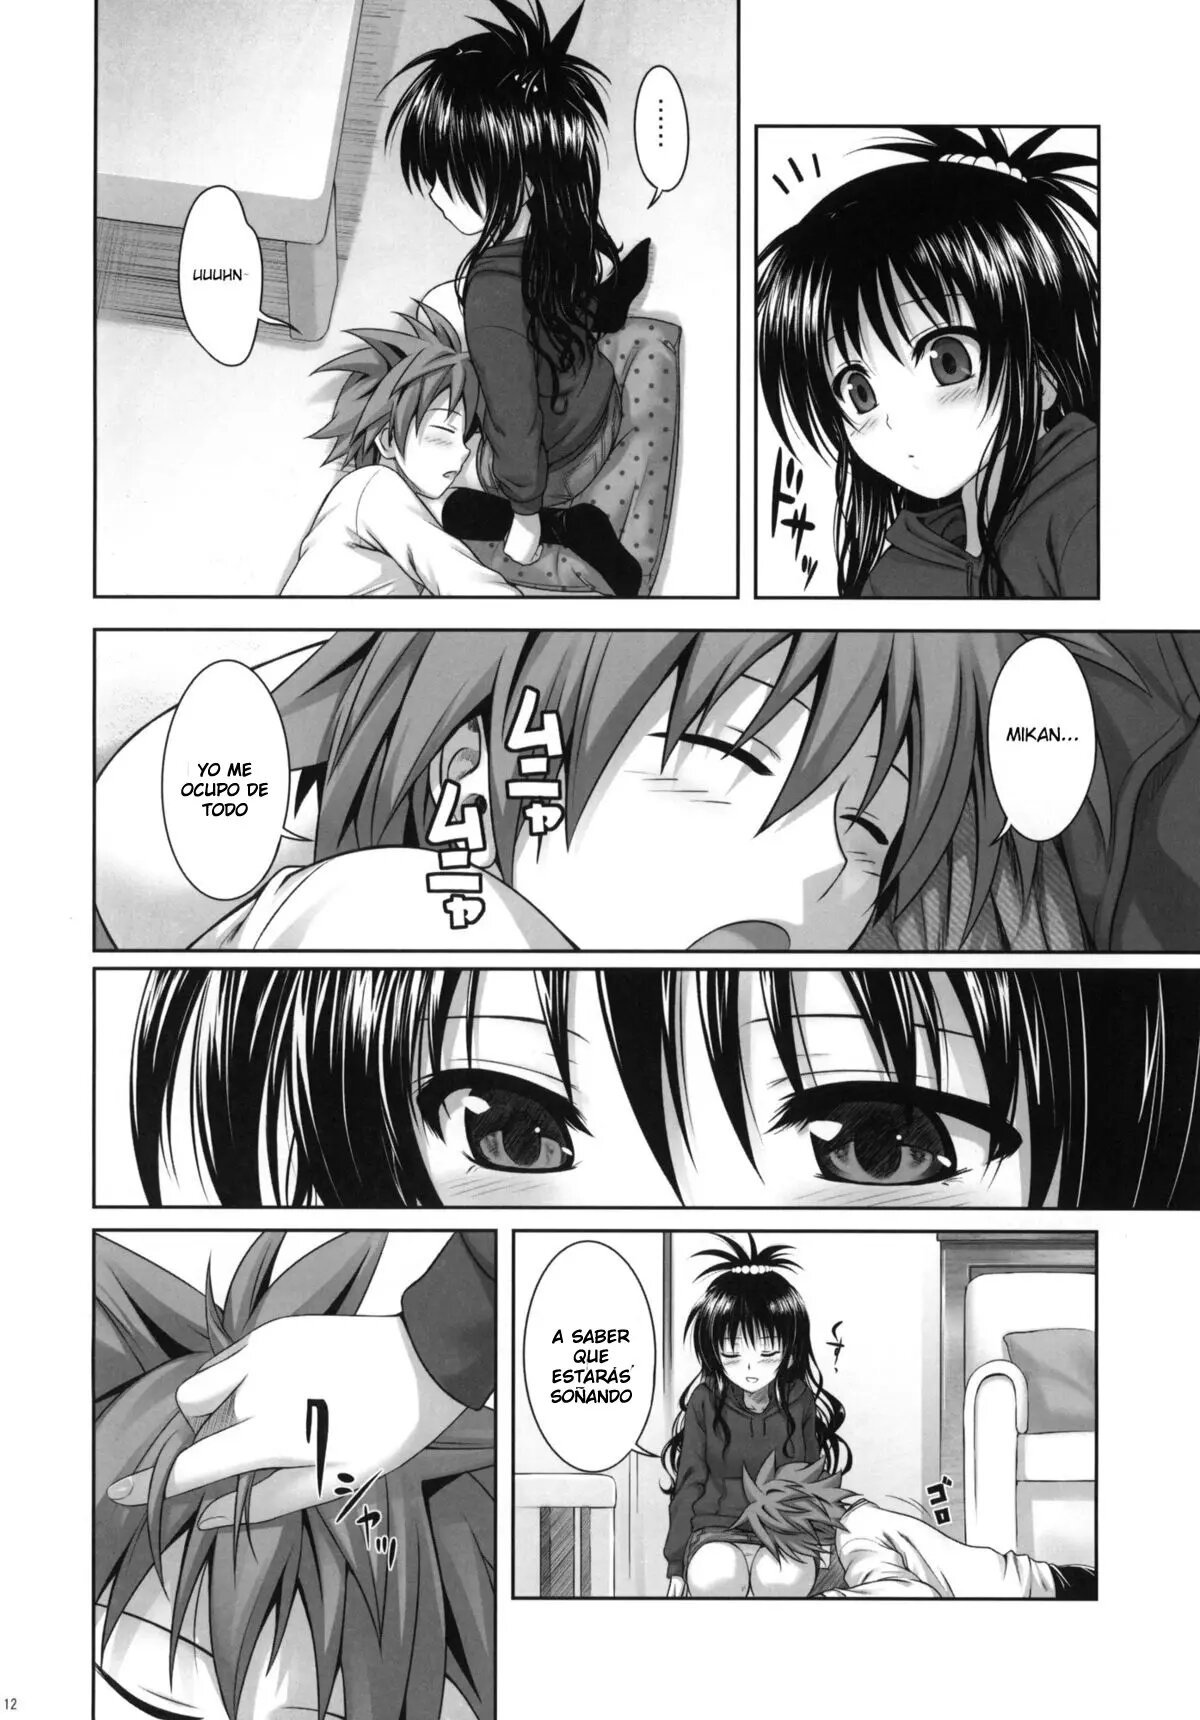 Mikan s delusion and usual days - 10